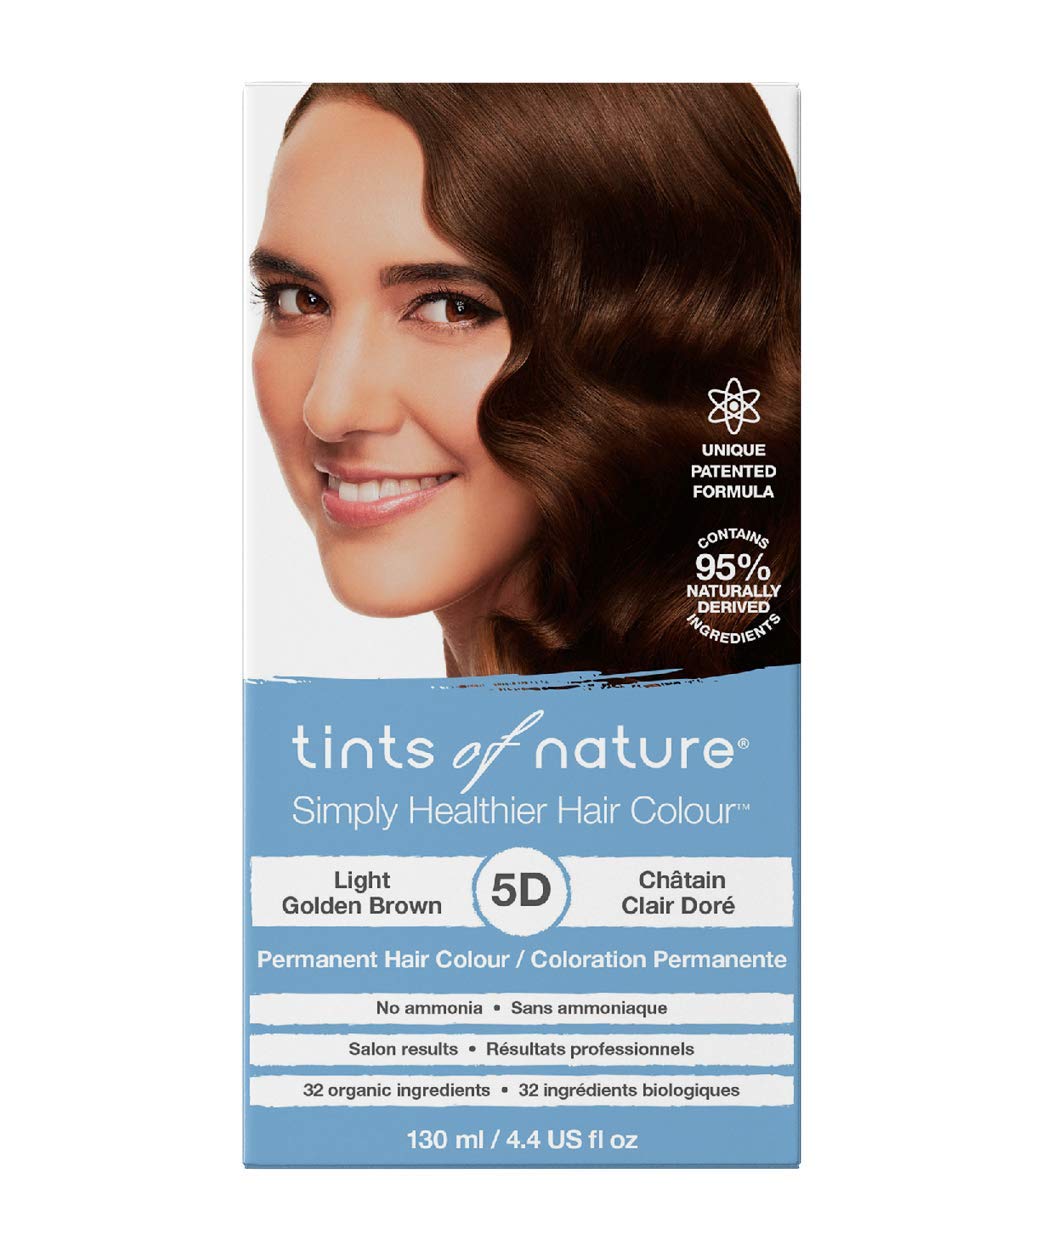 Tints of Nature Light Golden Brown Permanent Hair Dye 5D Nourishes Hair & Covers Greys - Single Pack, (5d) ‎golden